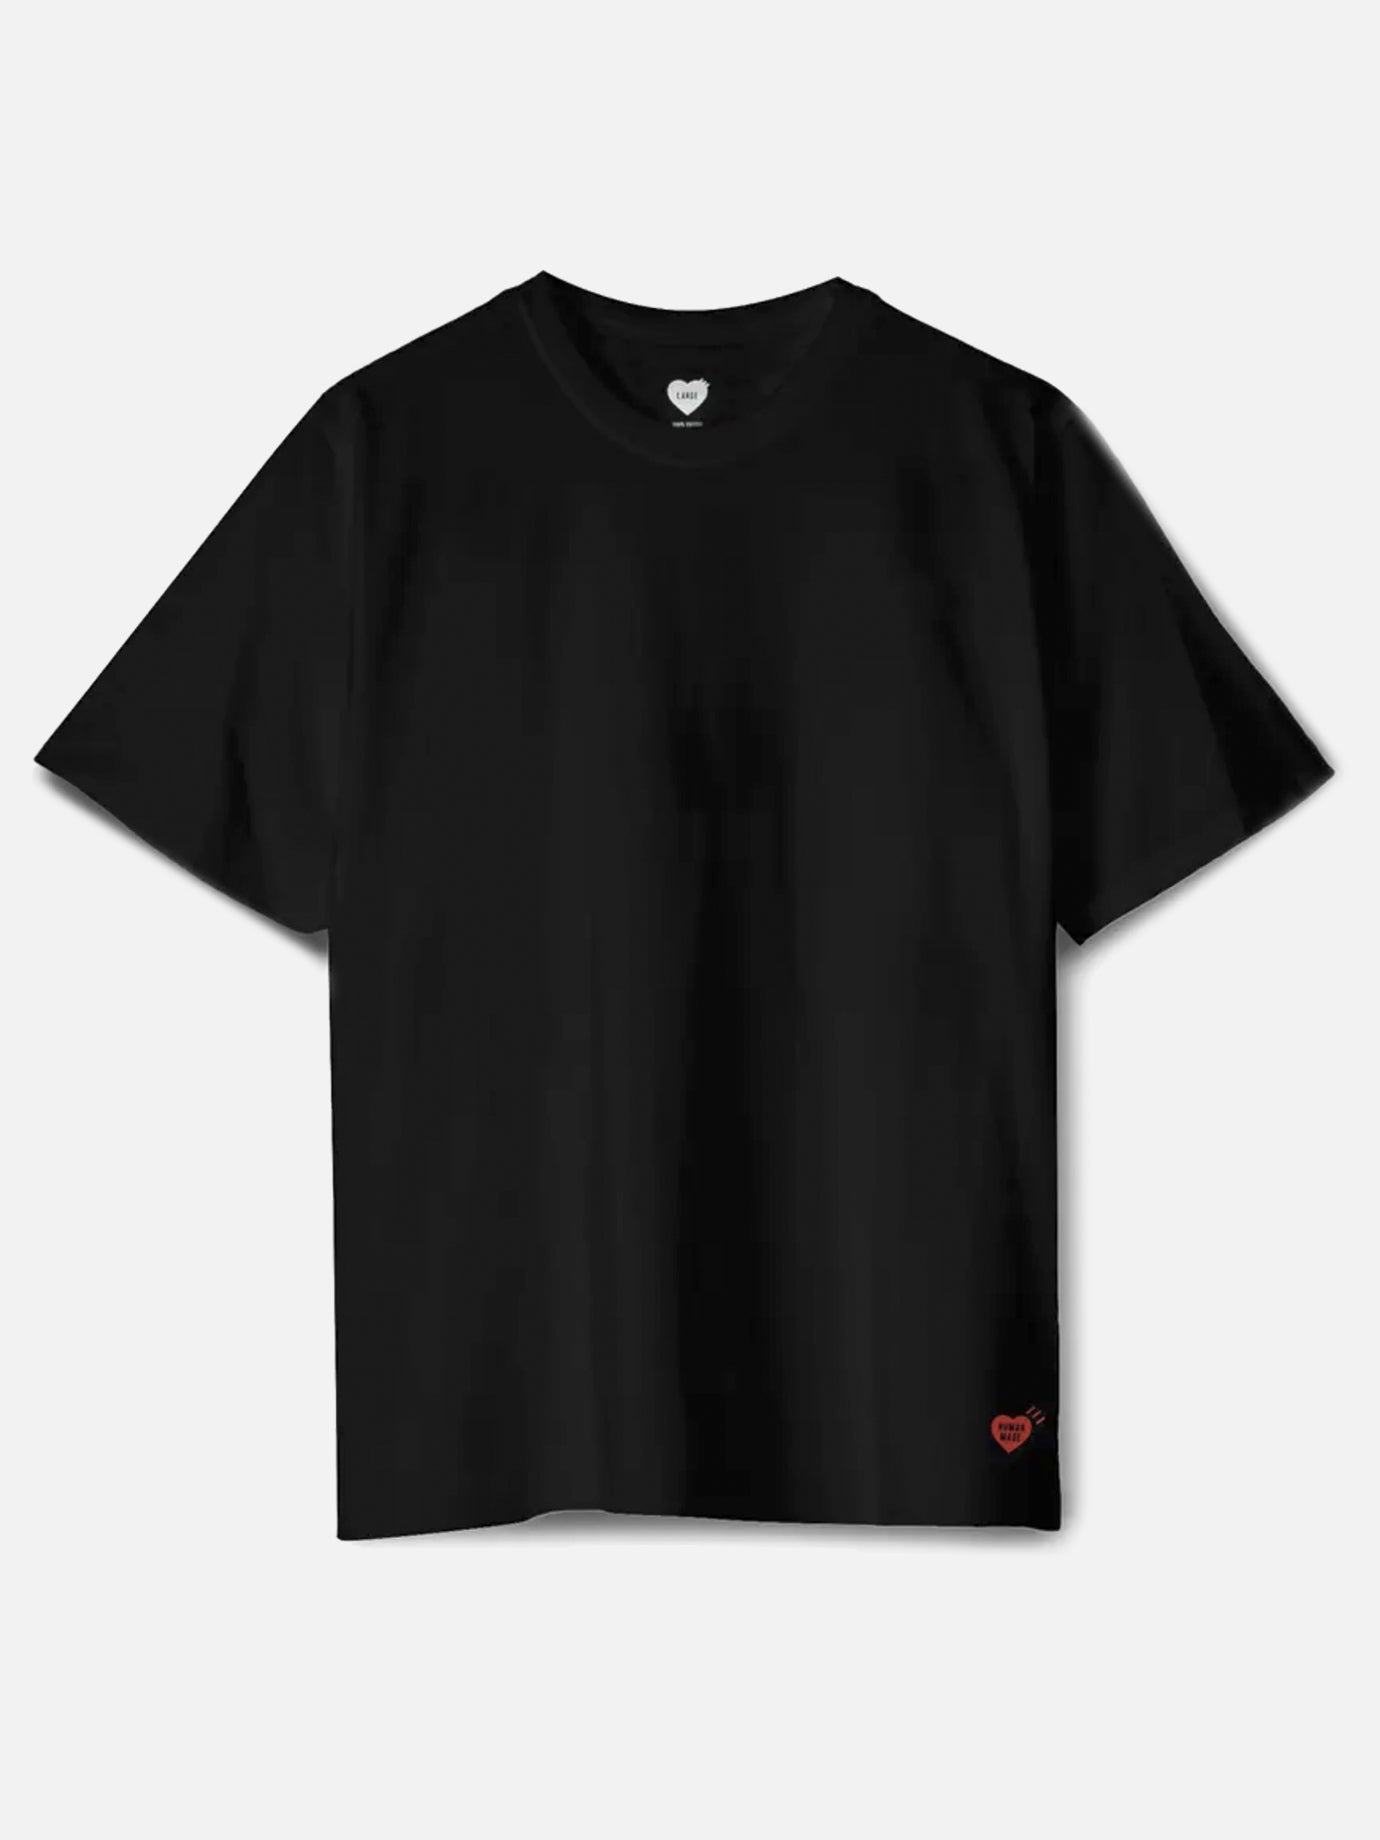 3-pack t-shirt set with logo